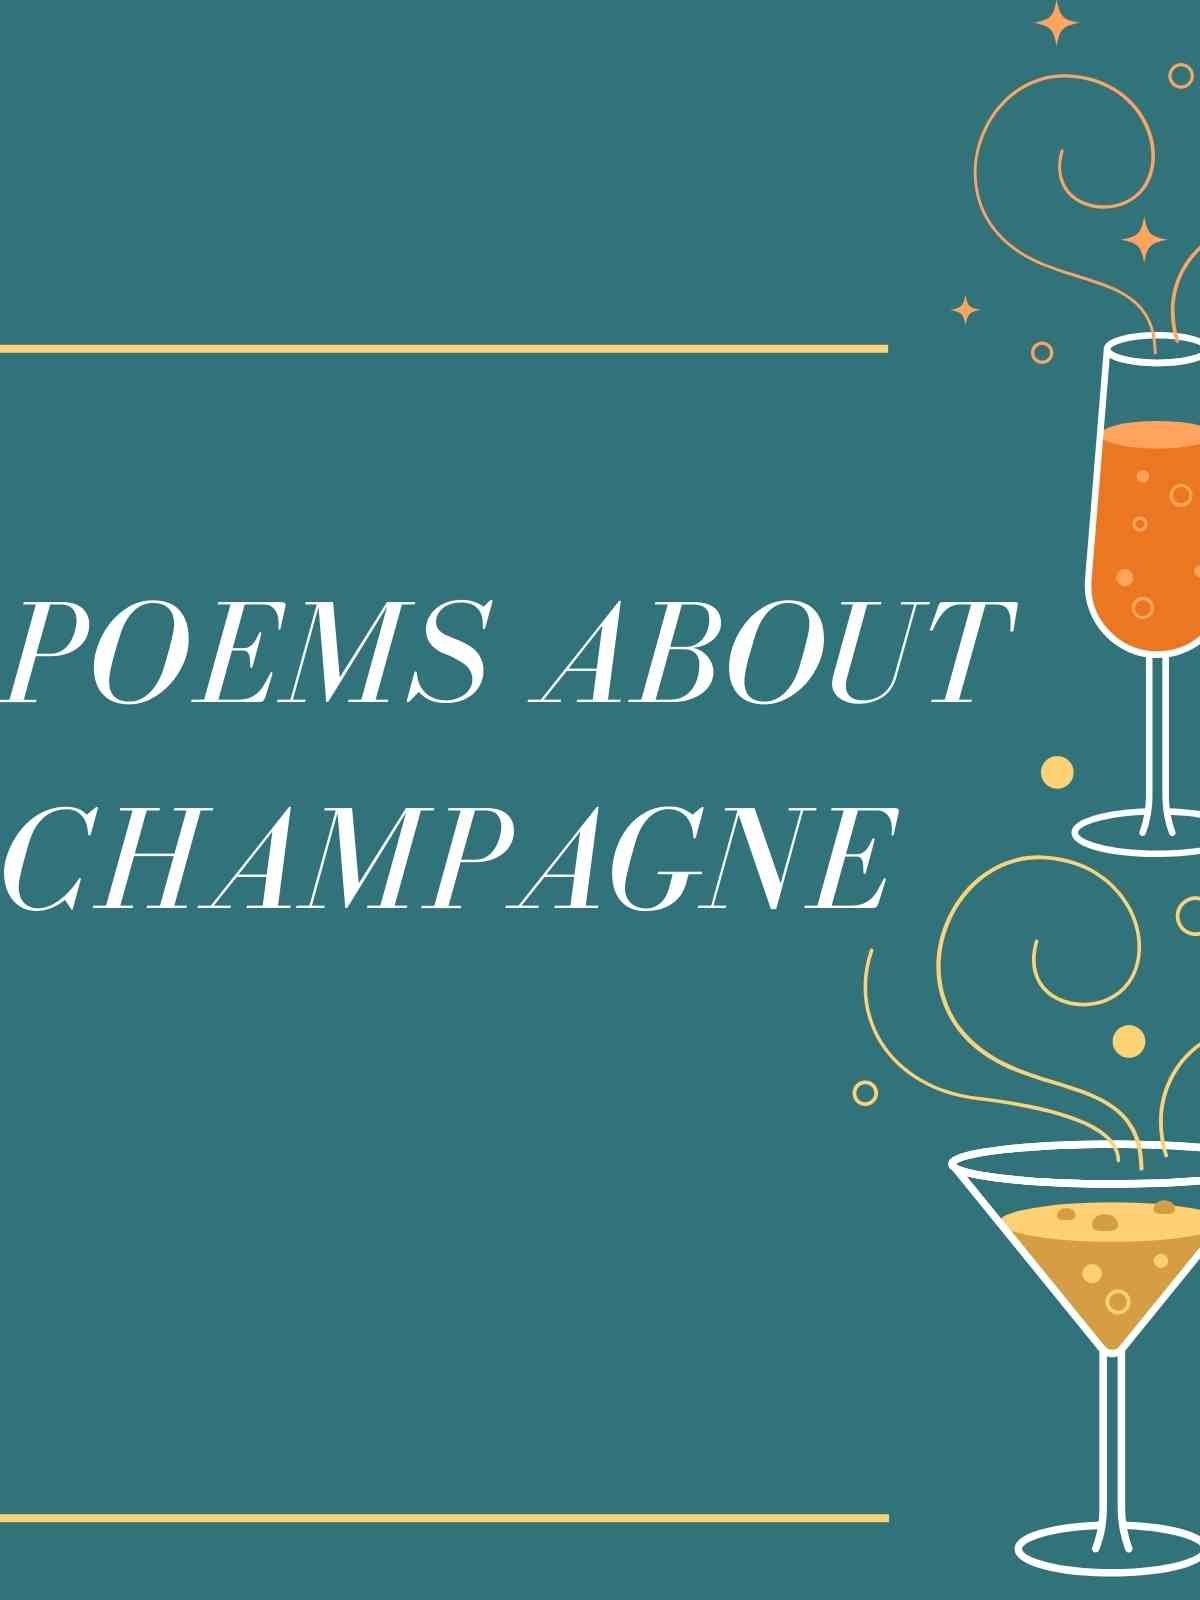 Poetry about champagne 